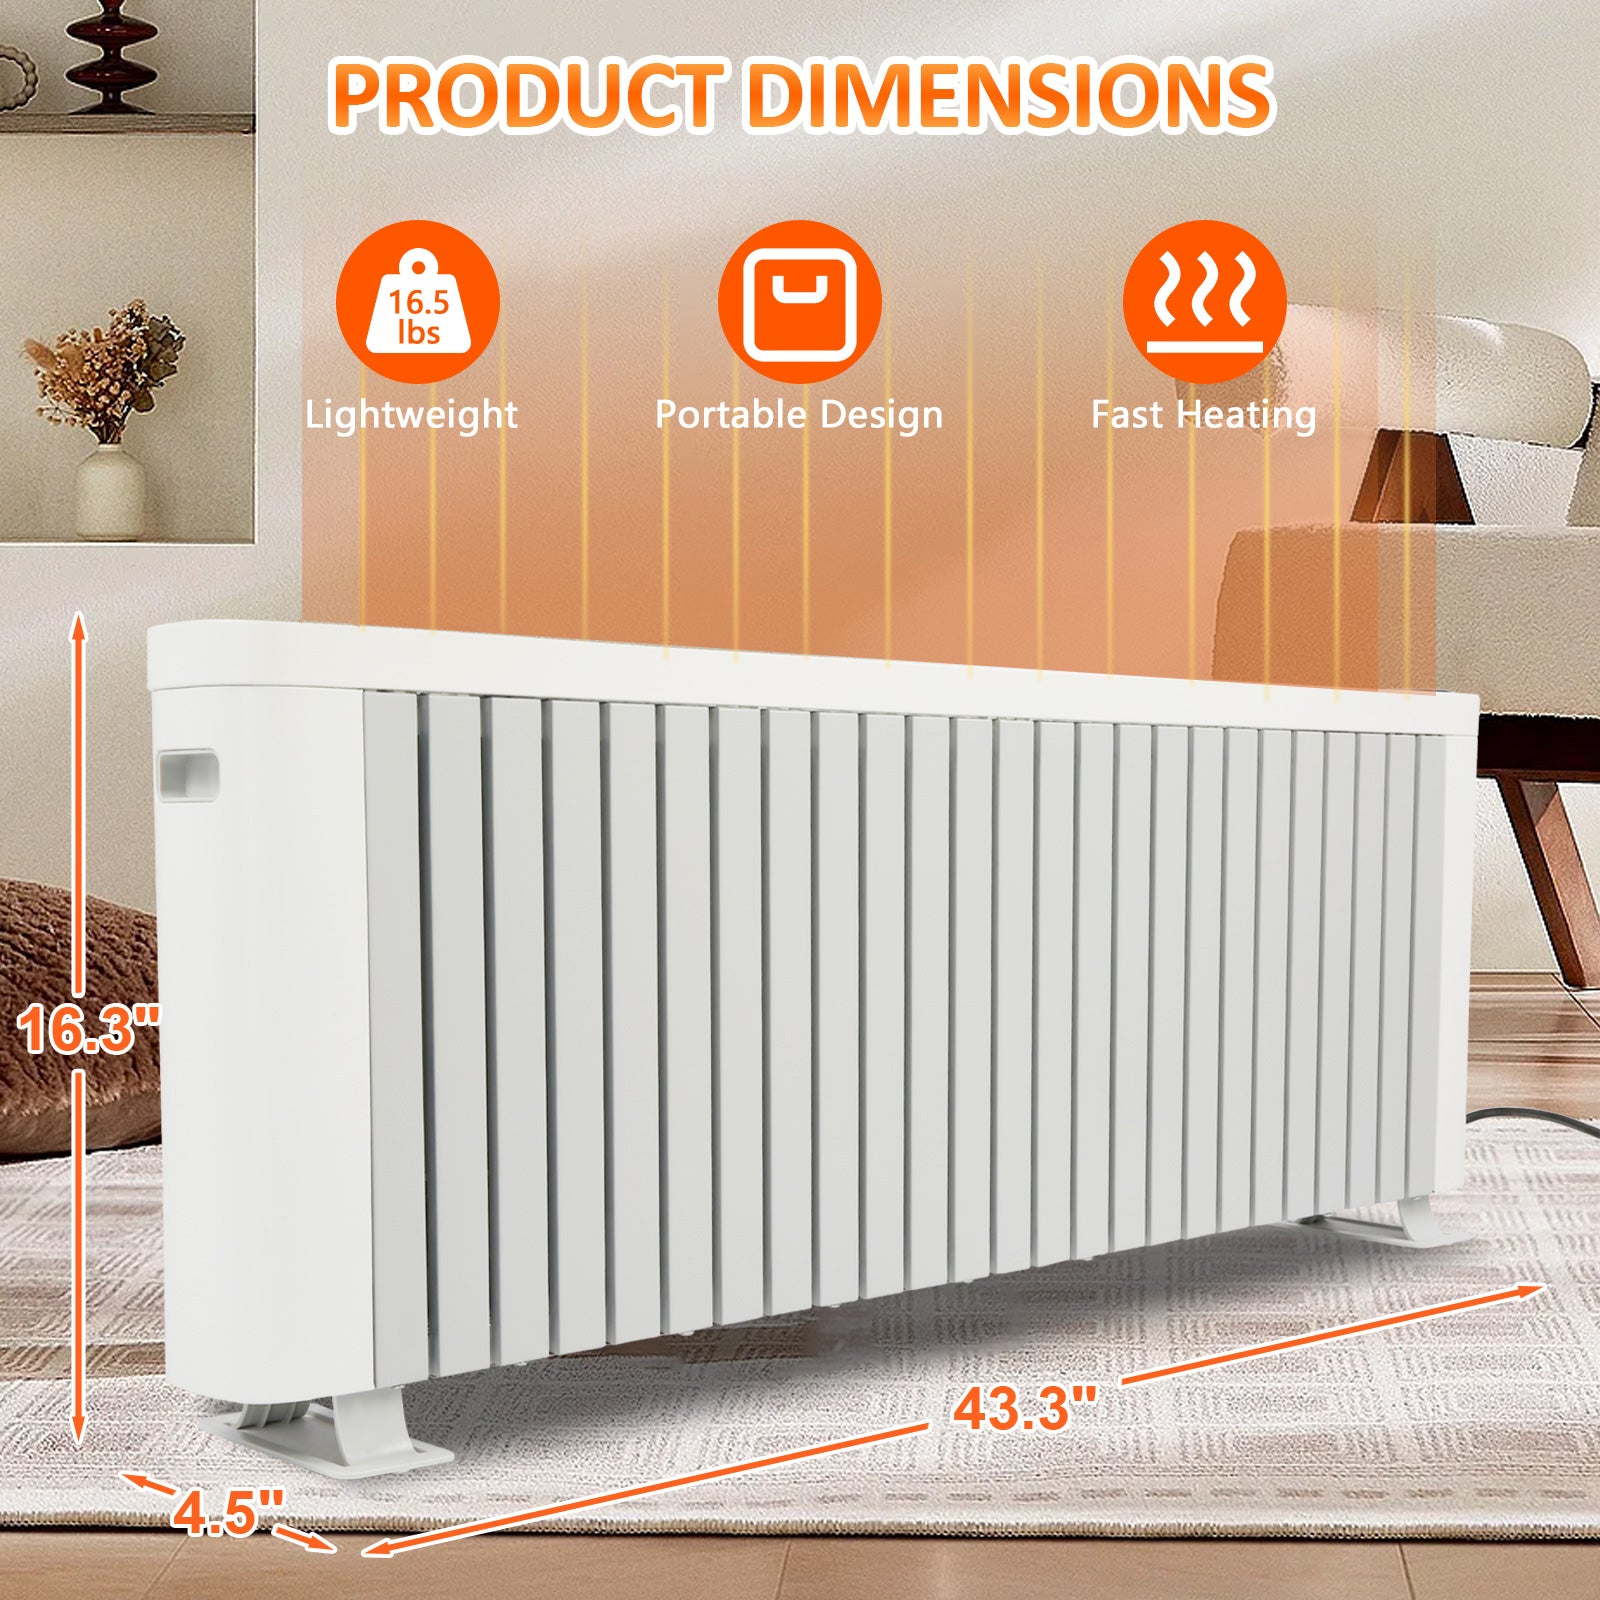 1500W Electric Baseboard Heater Large Room Space Heater with Silent Operation